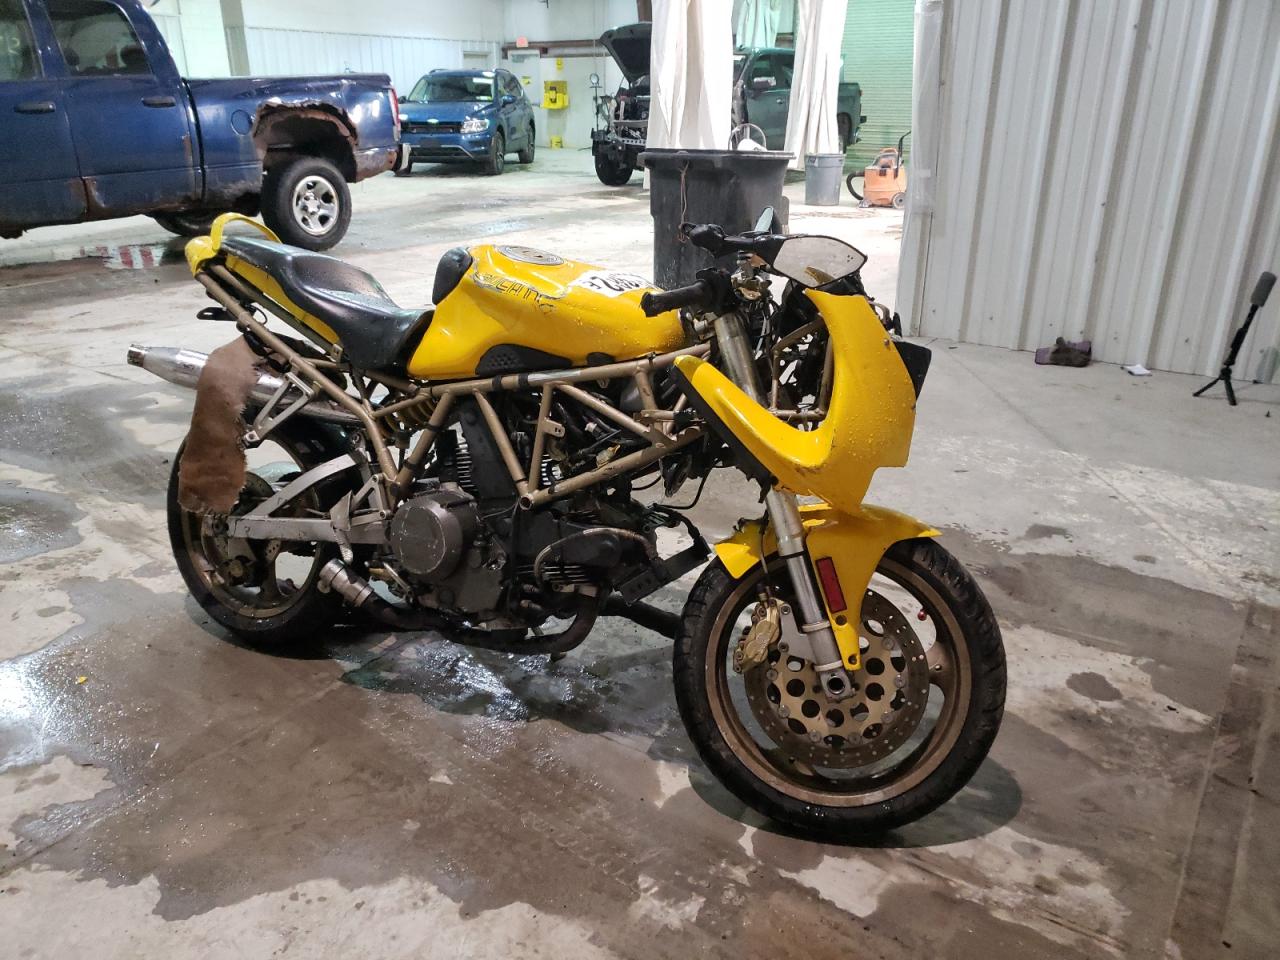 1999 Ducati 750 SS for sale at Copart Leroy, NY Lot #72562 